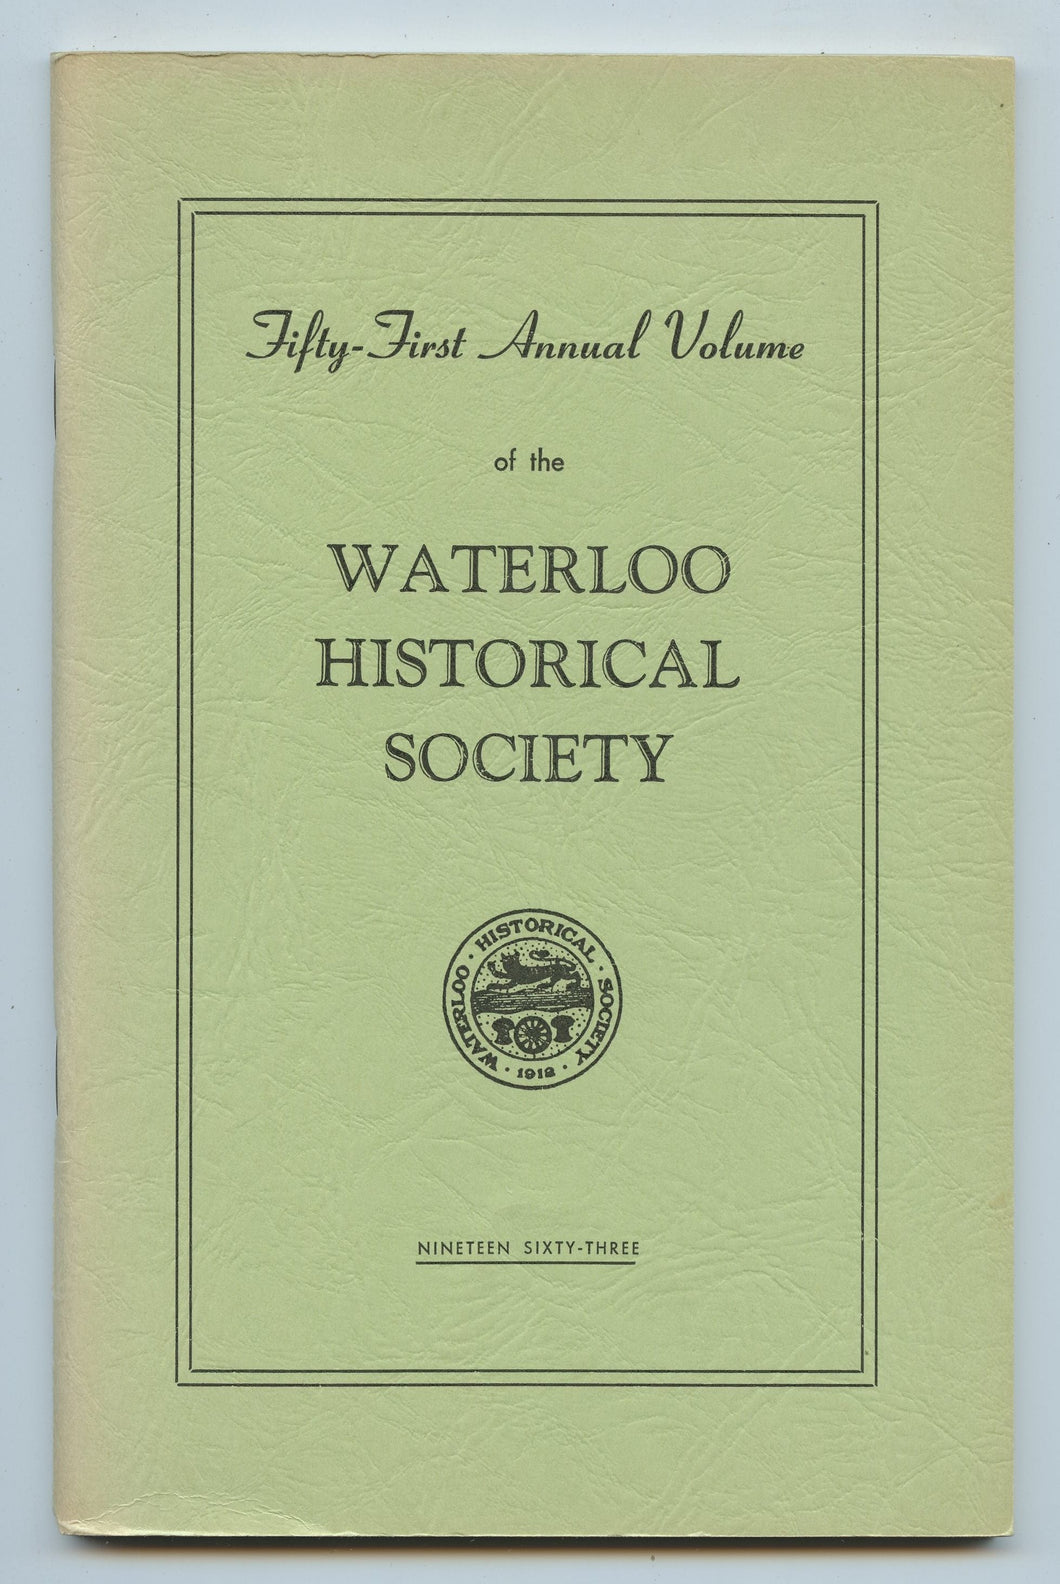 Fifty-First Annual Volume of the Waterloo Historical Society 1963